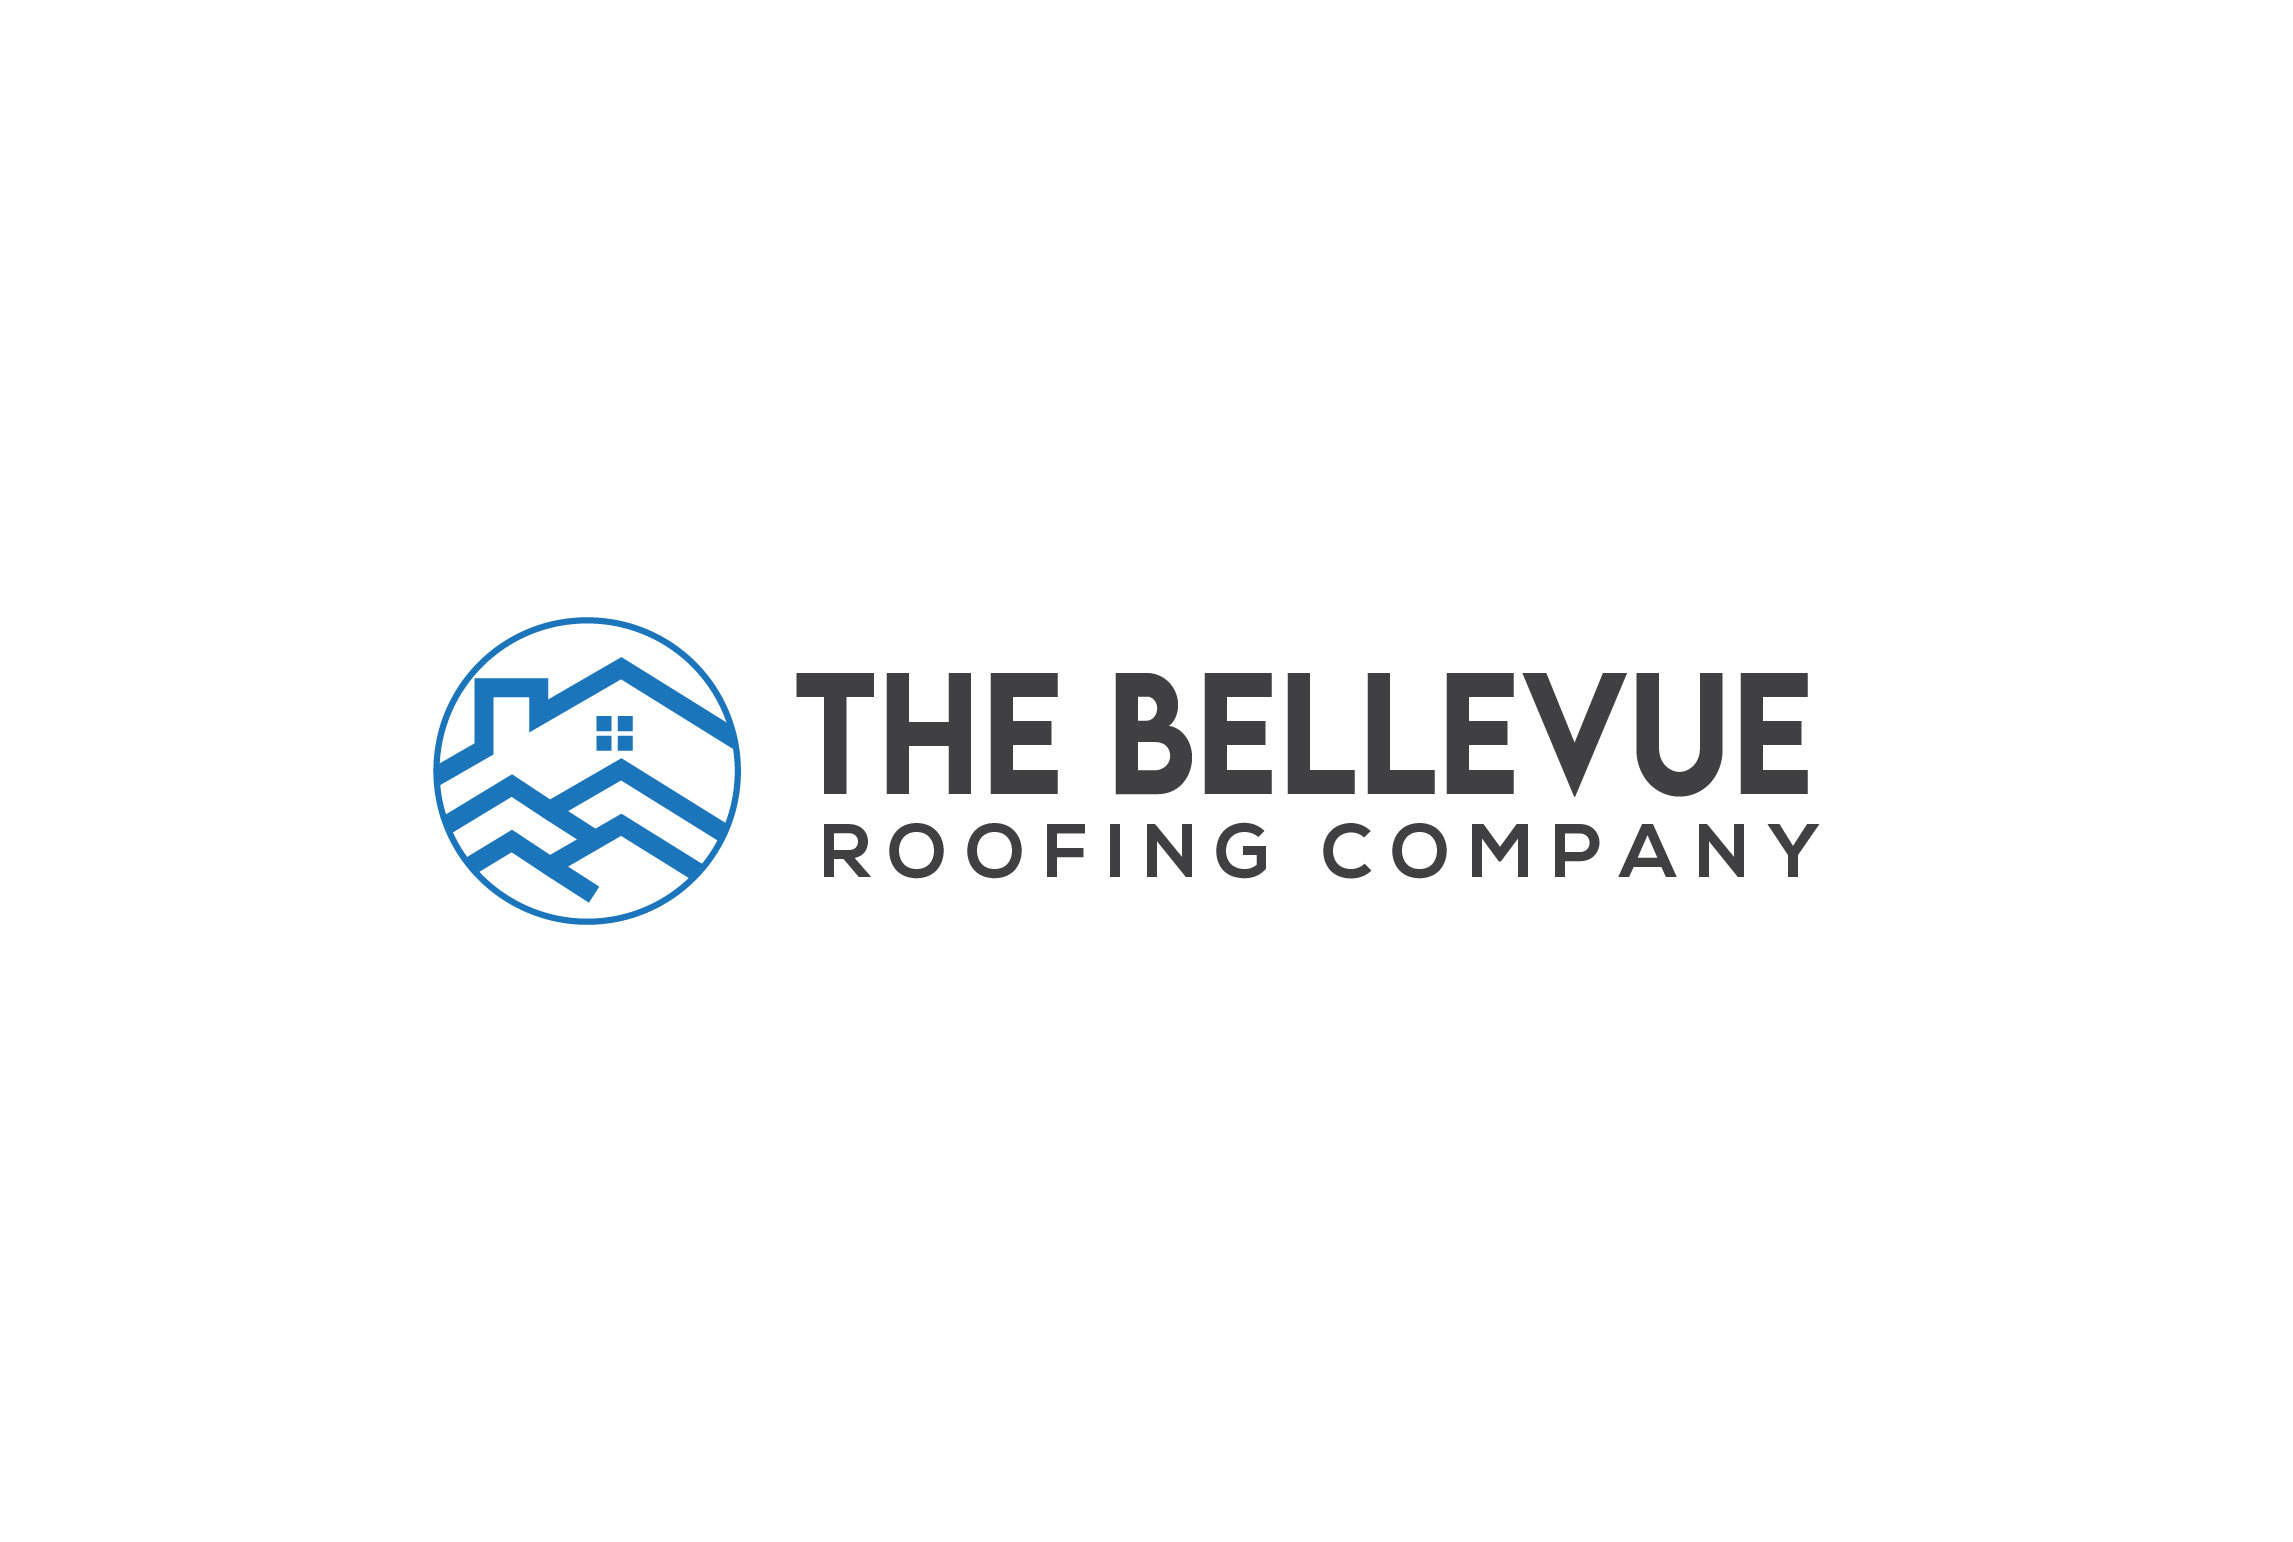 The Bellevue Roofing Company